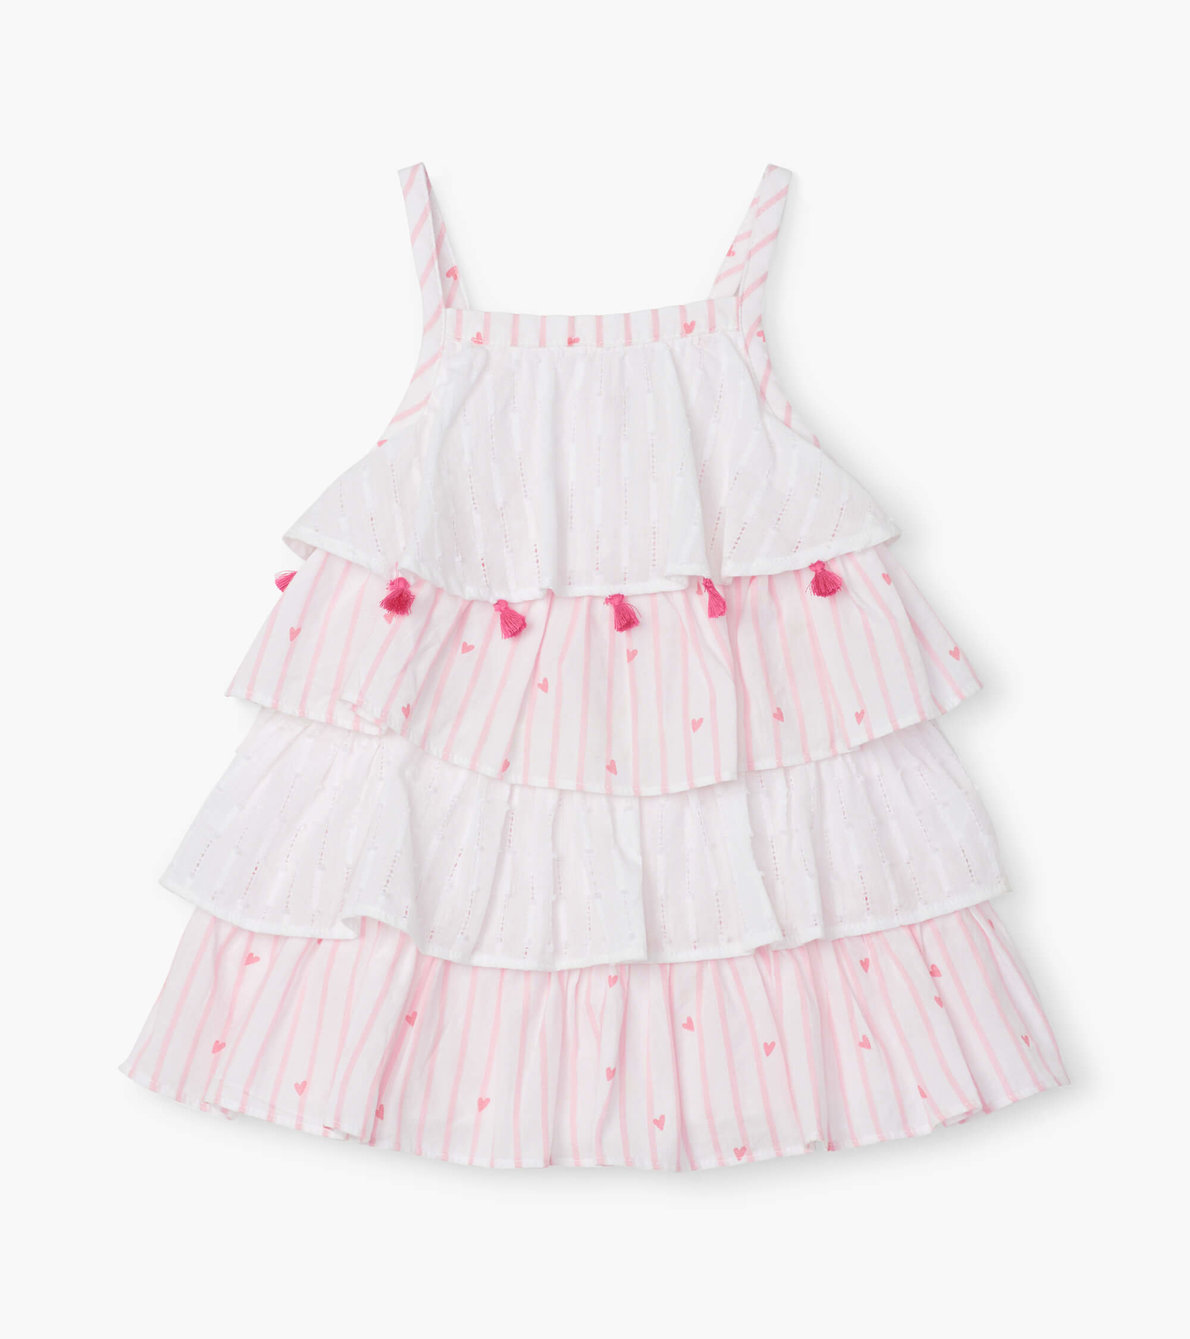 View larger image of Scattered Hearts Baby Layered Dress